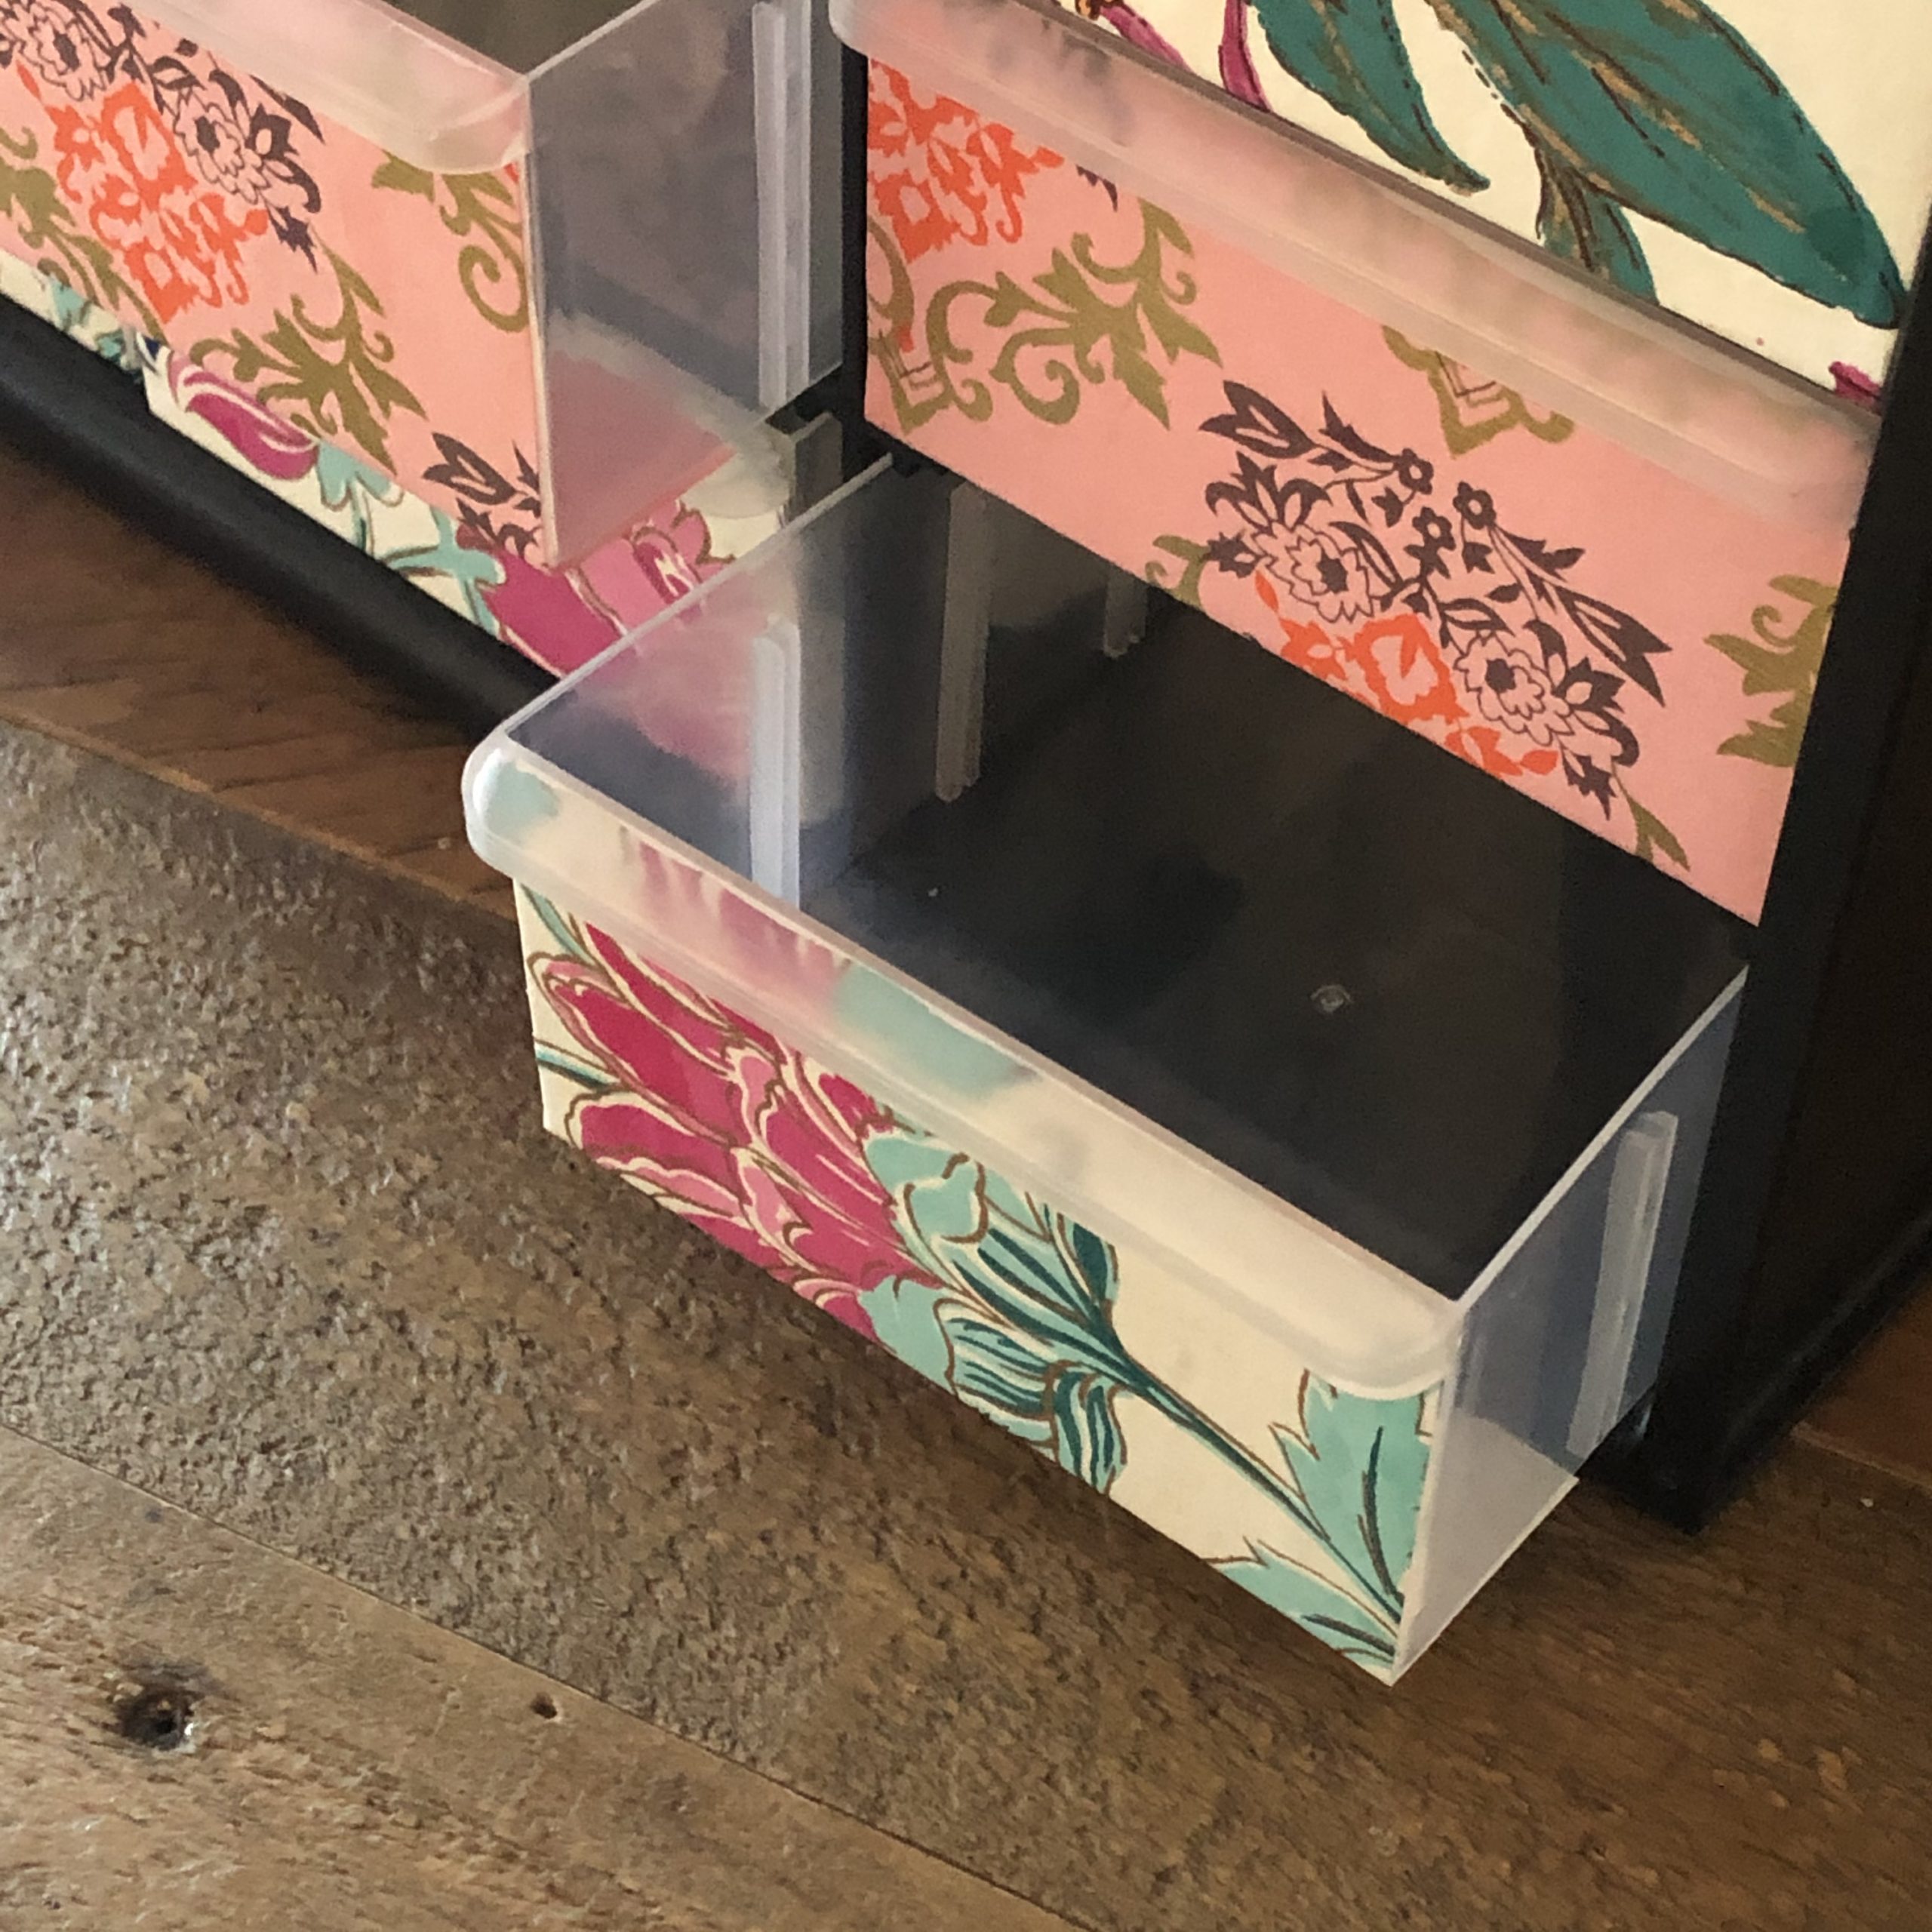 Craft Storage Box Makeovers with Mod Podge and Artbin - CATHIE